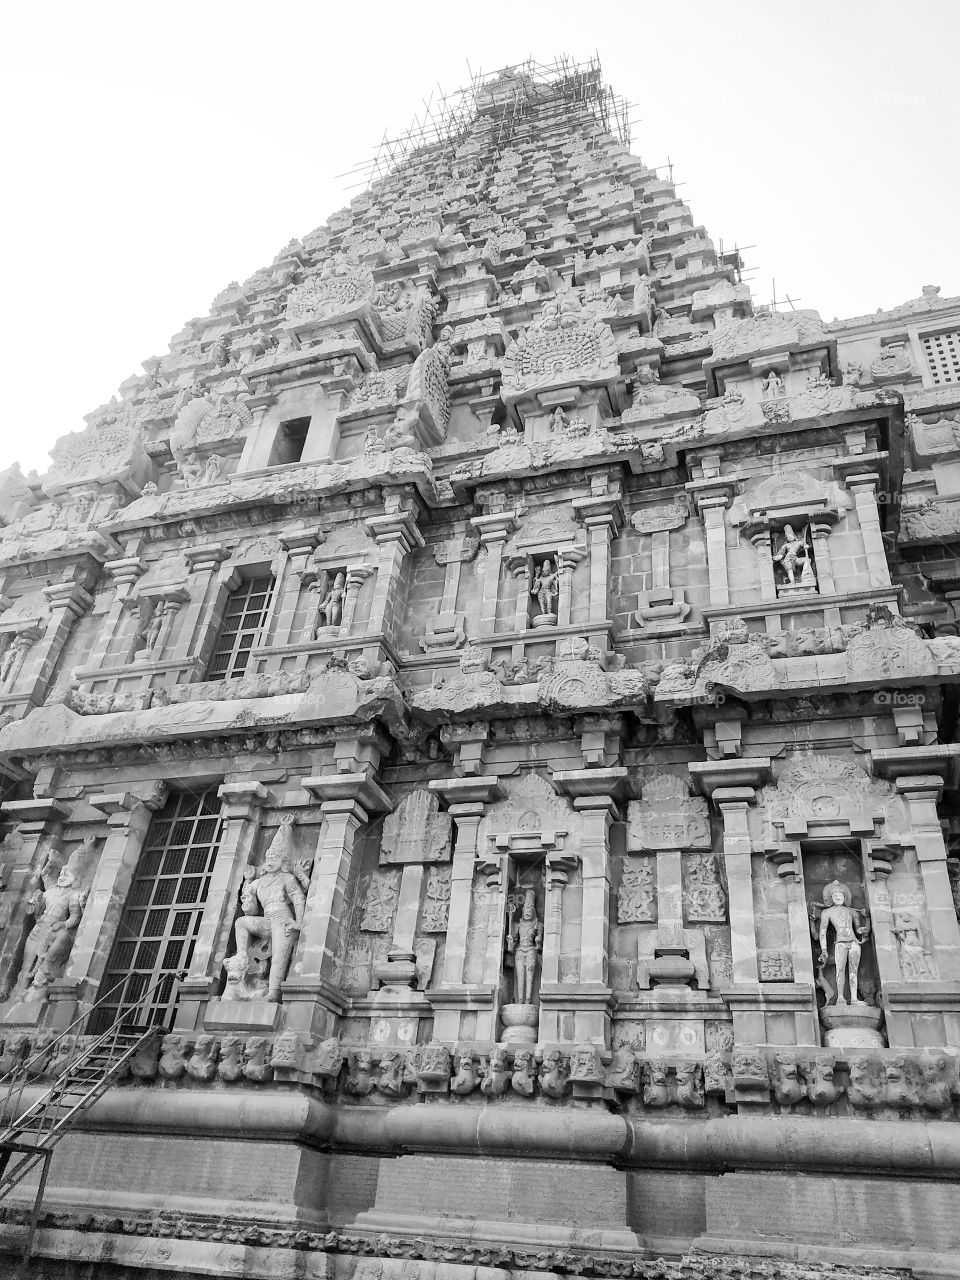 Architecture - Temple 1000 years old ..temple in india Tanjore